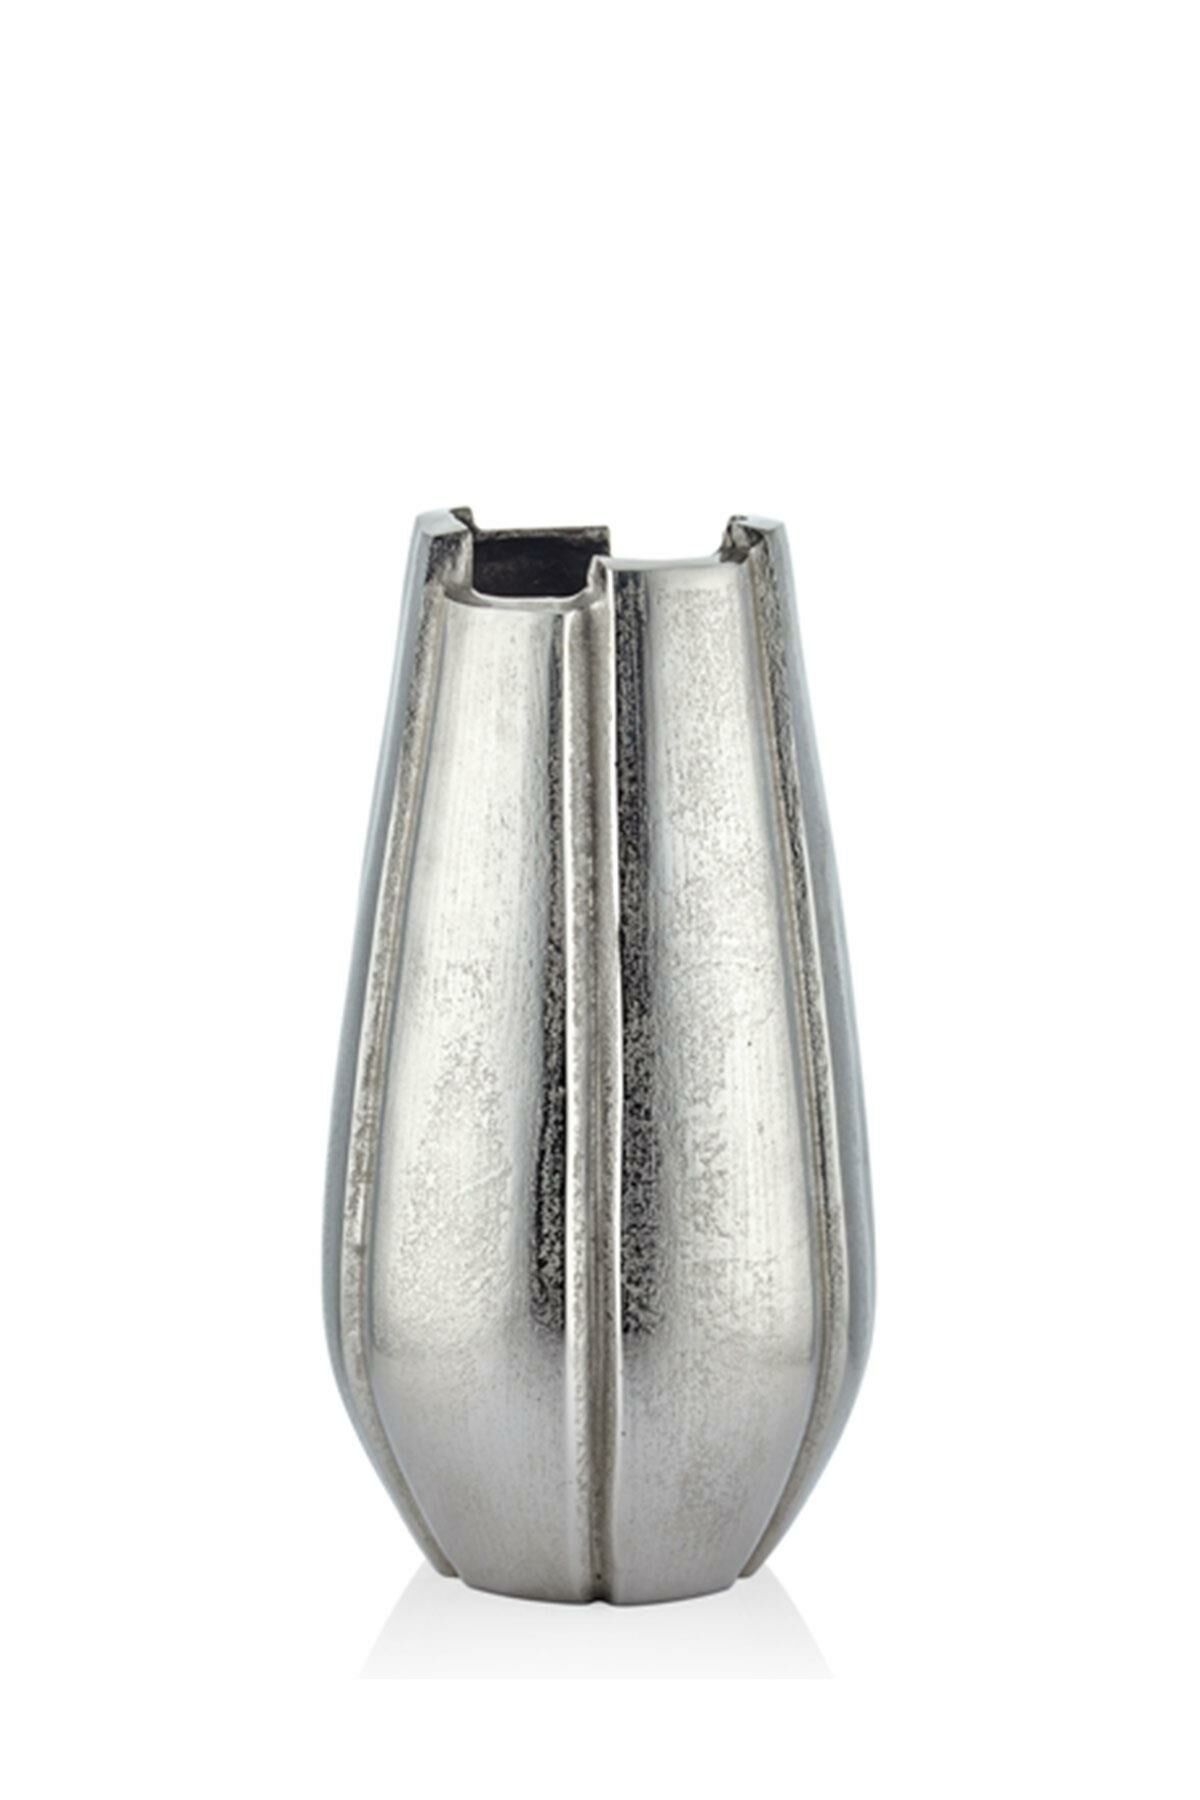 STAIRS SILVER SMALL VASE 22*22*40CM